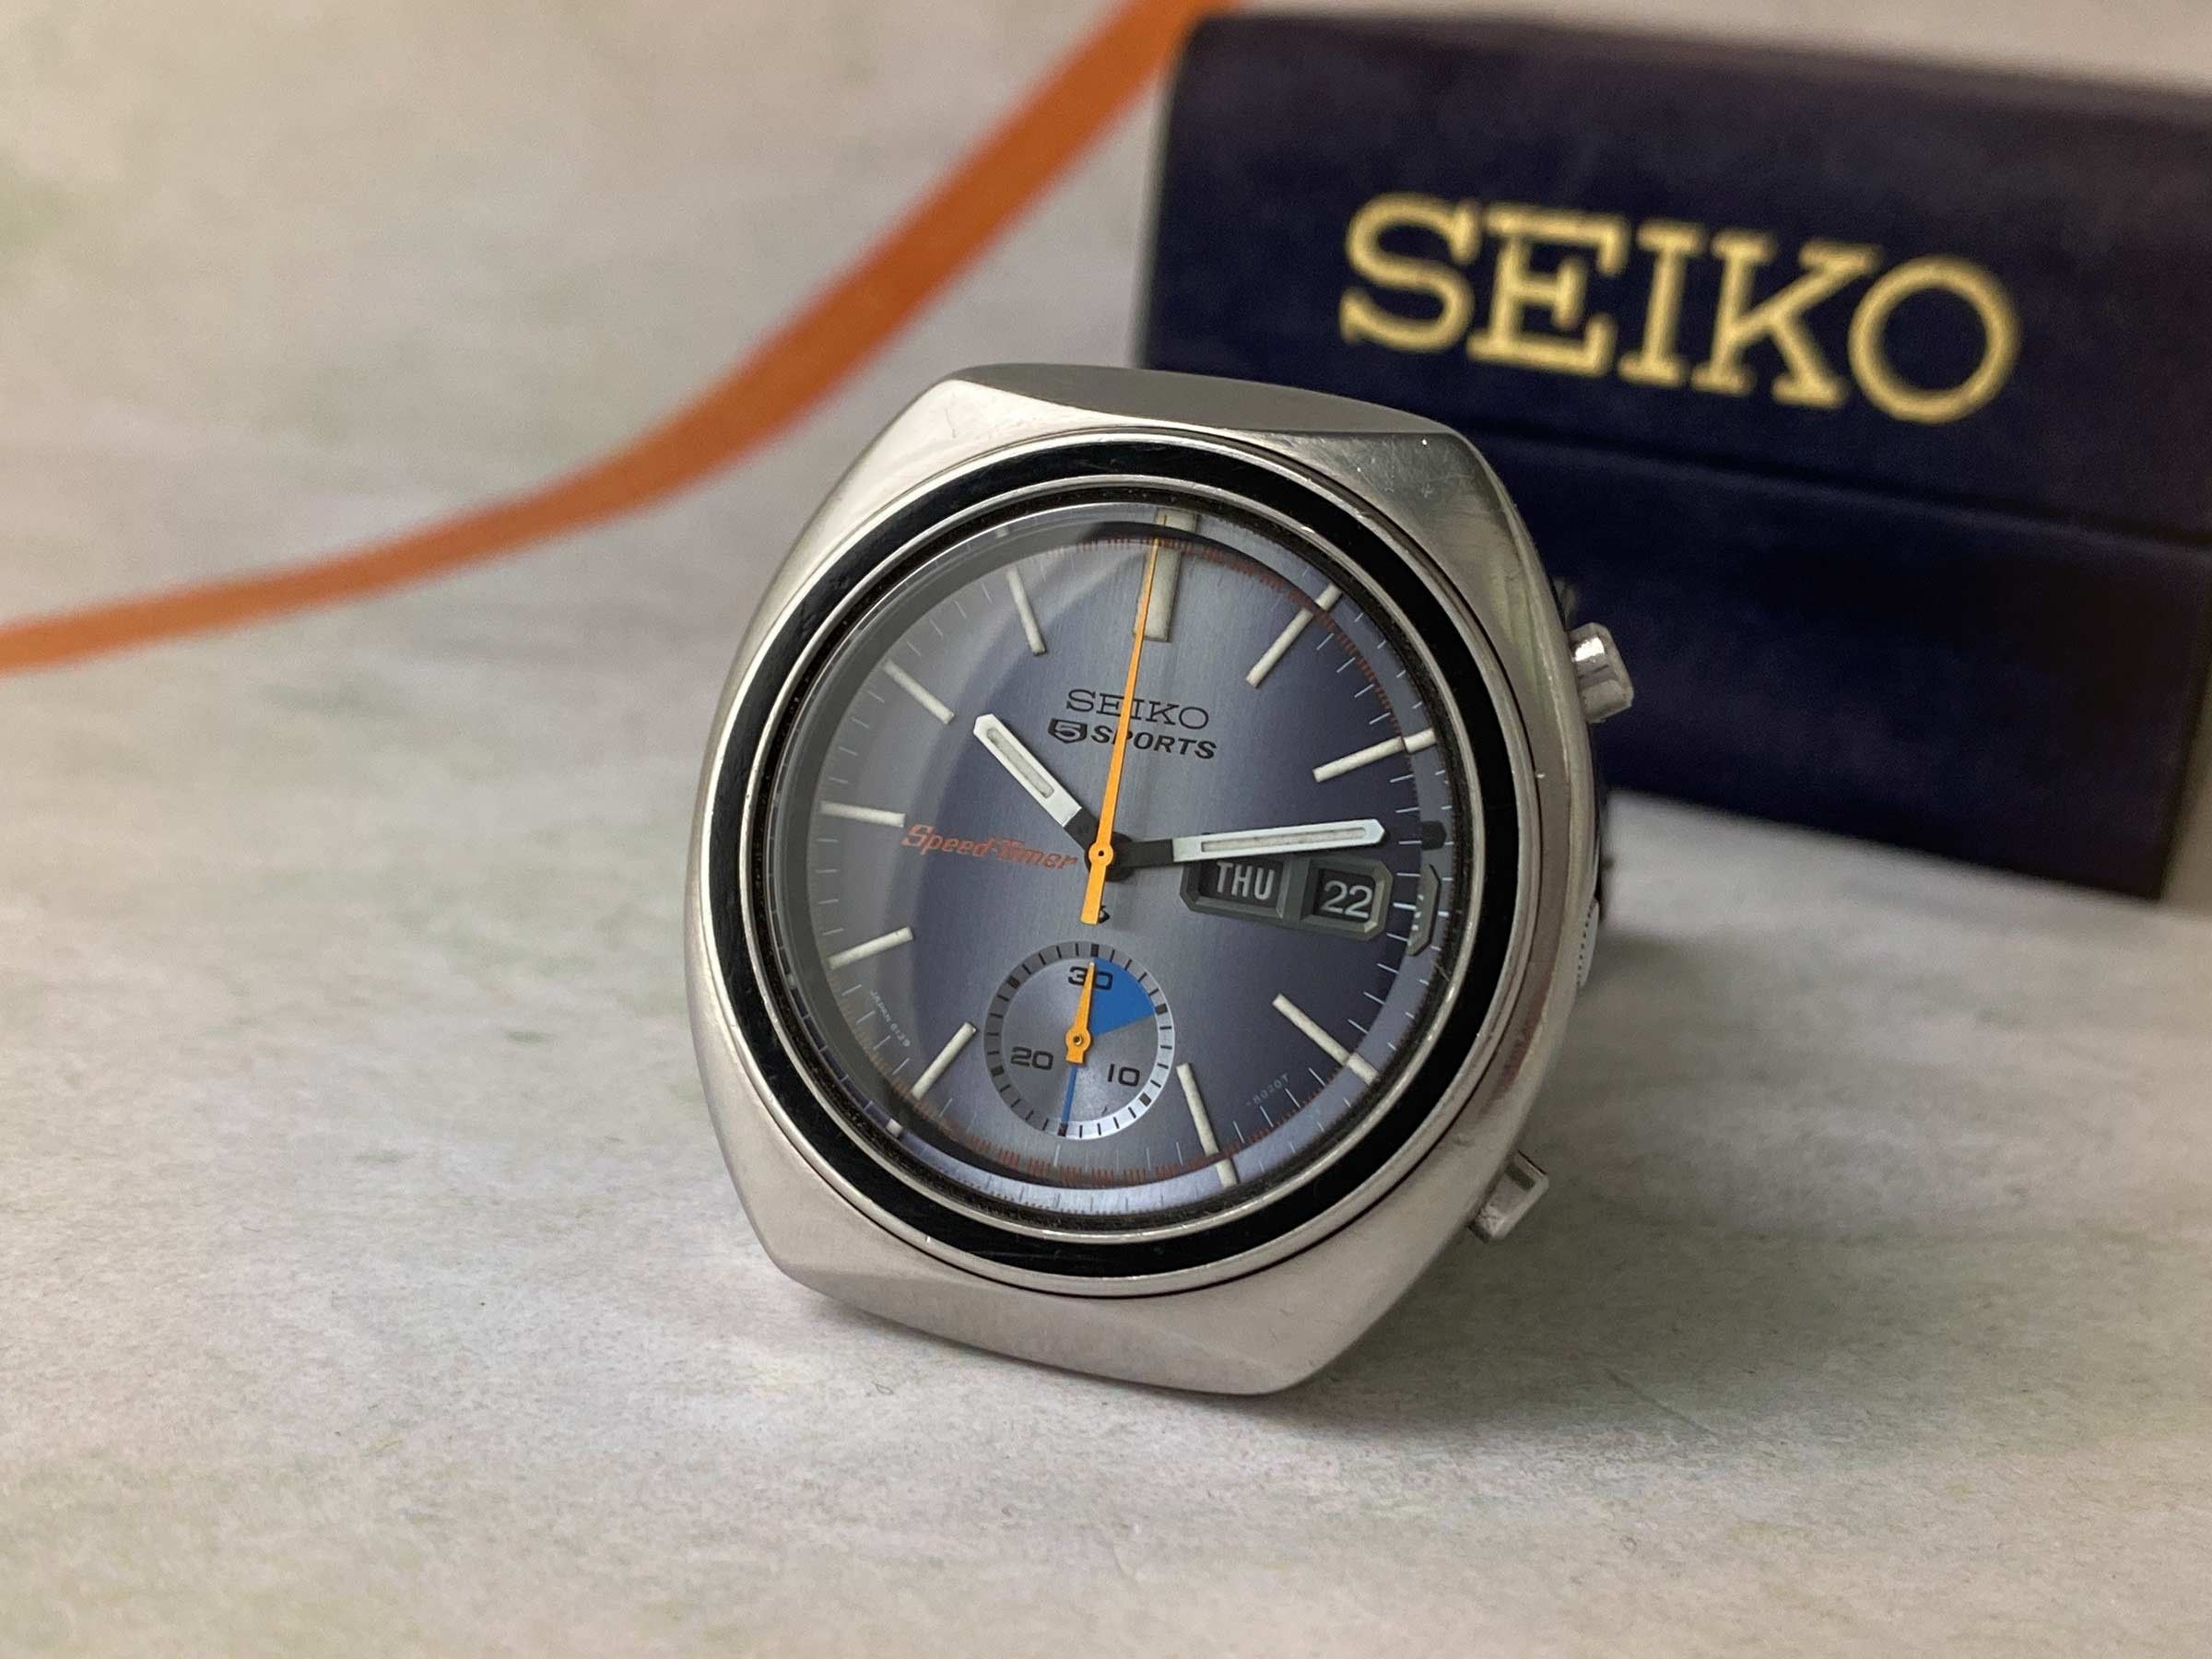 SEIKO 5 SPORTS SPEED TIMER Vintage automatic chronograph watch Ref. Ref.  6139-8002 JAPAN J Cal. 6139 ***AWESOME *** Seiko Vintage watches - Watches83